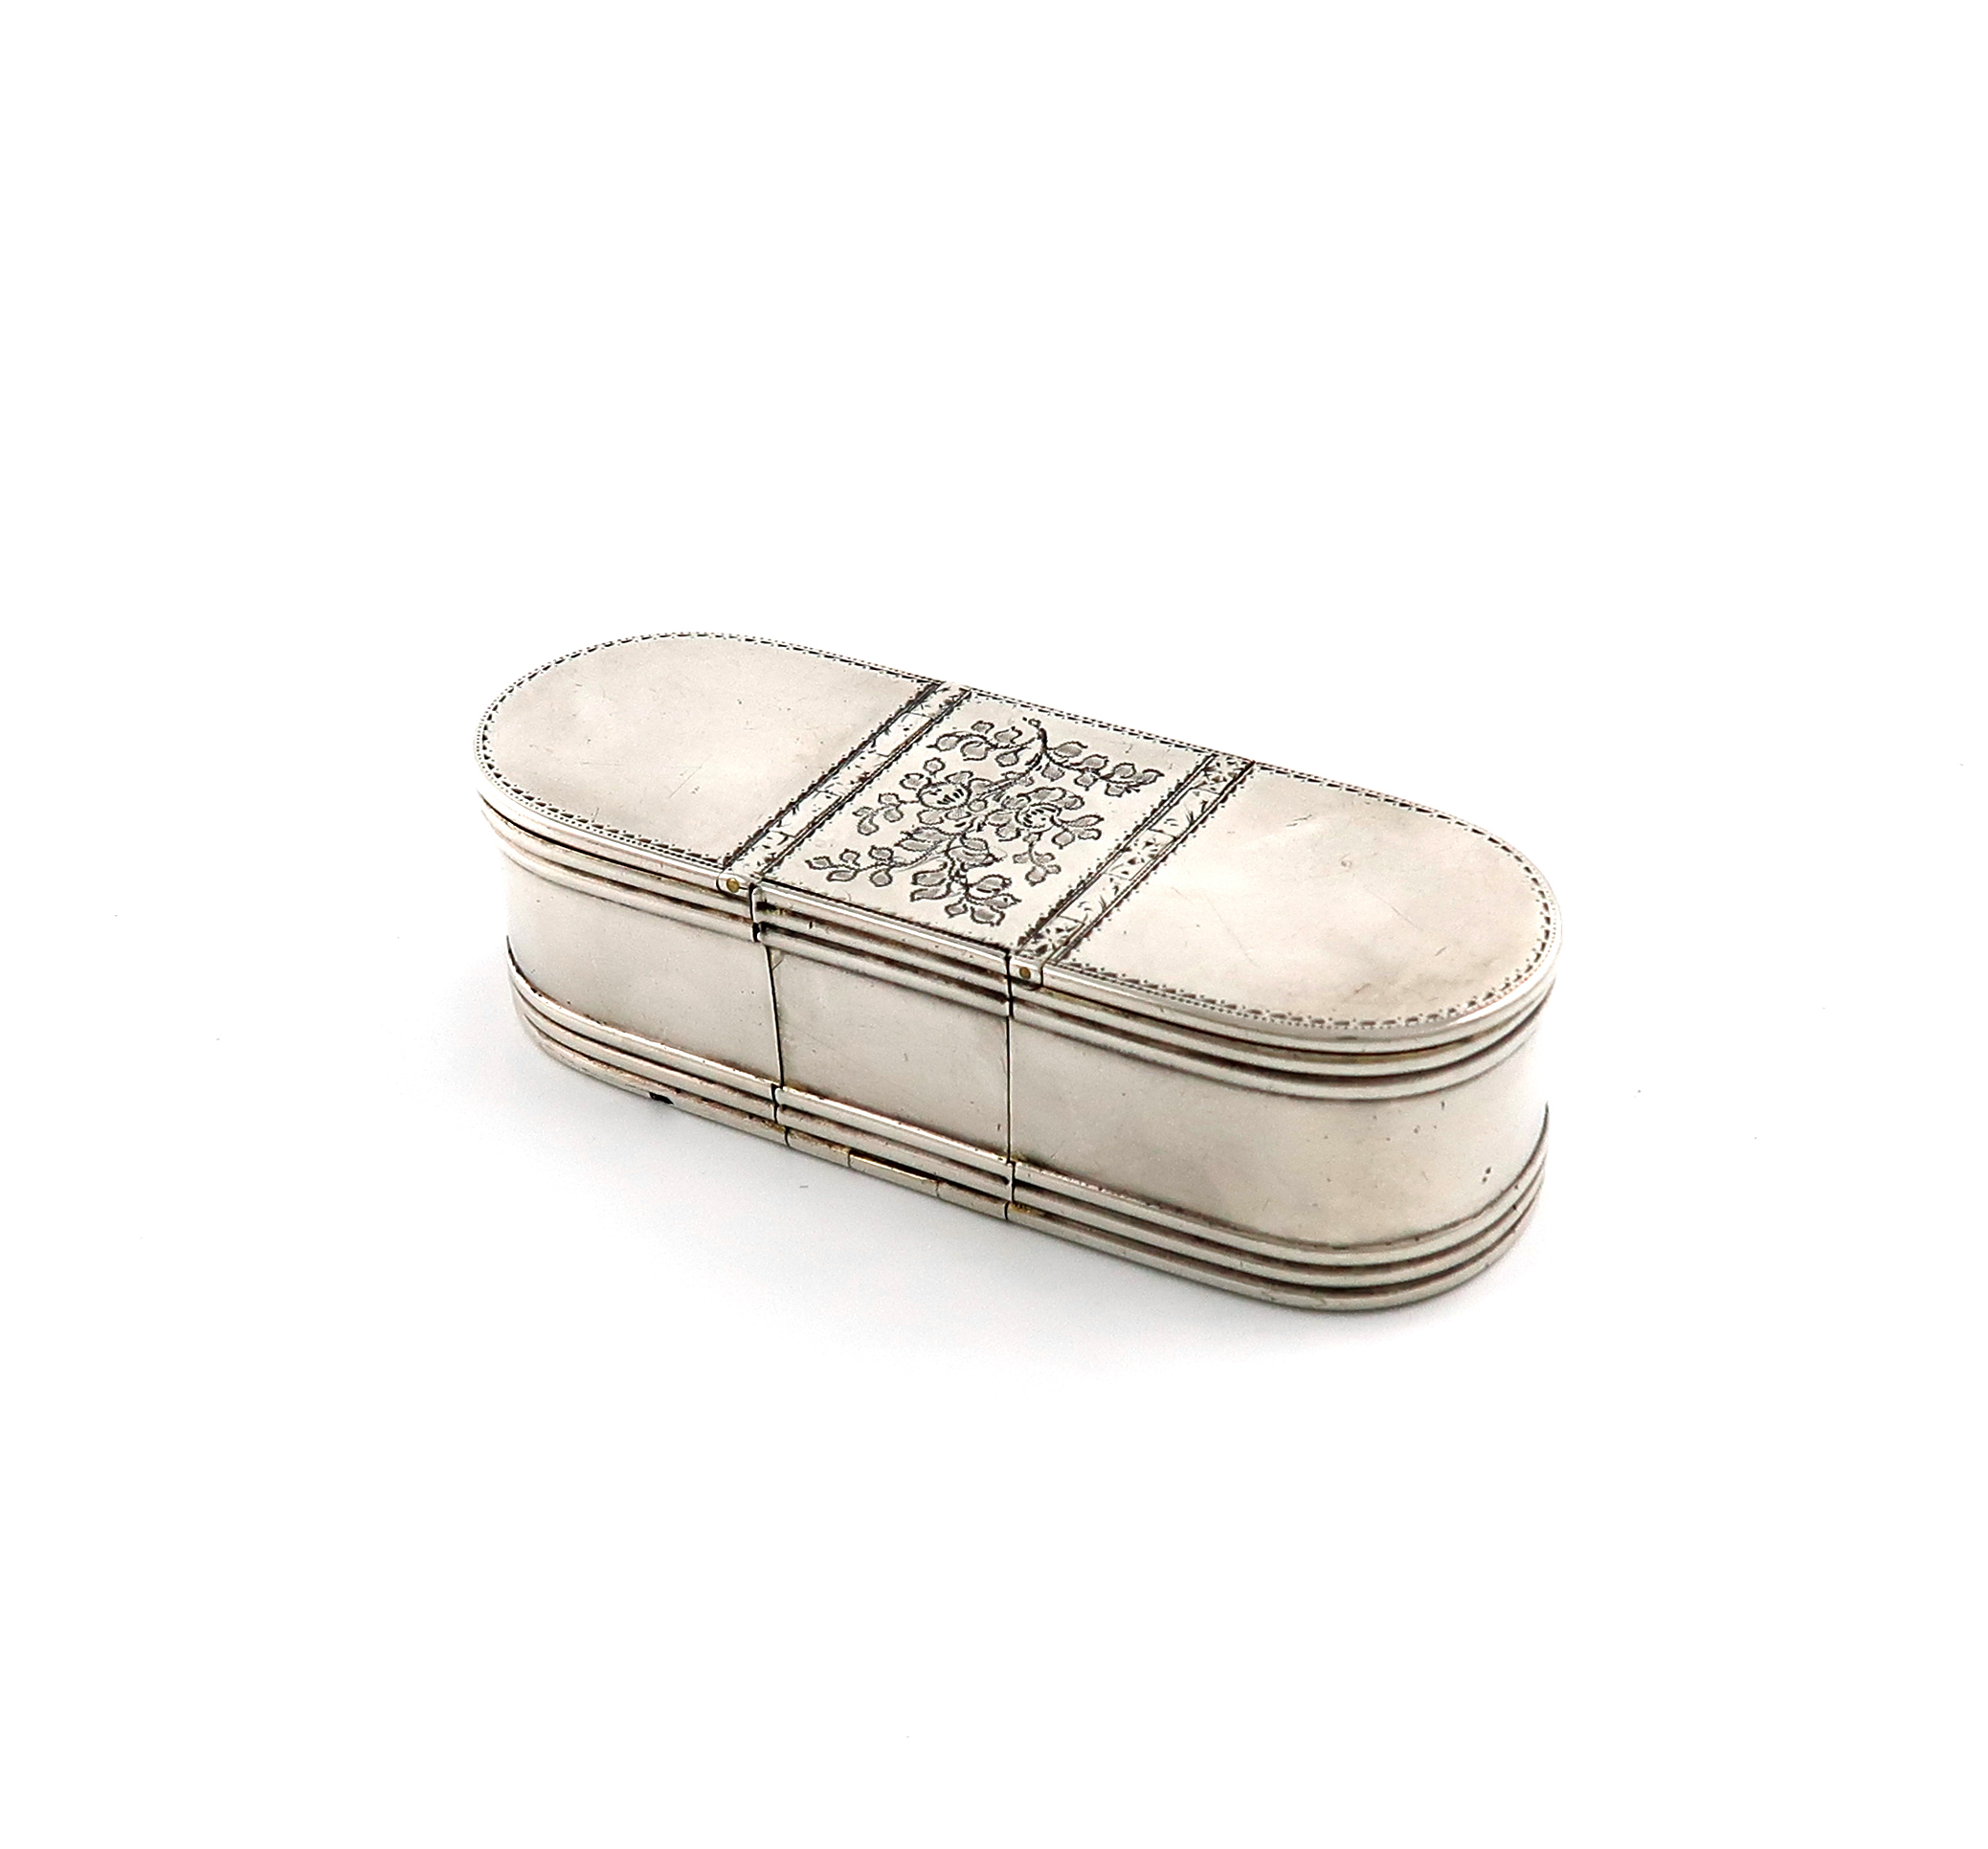 A George III silver triple snuff box, possibly by George Collins, London 1796, rounded rectangular